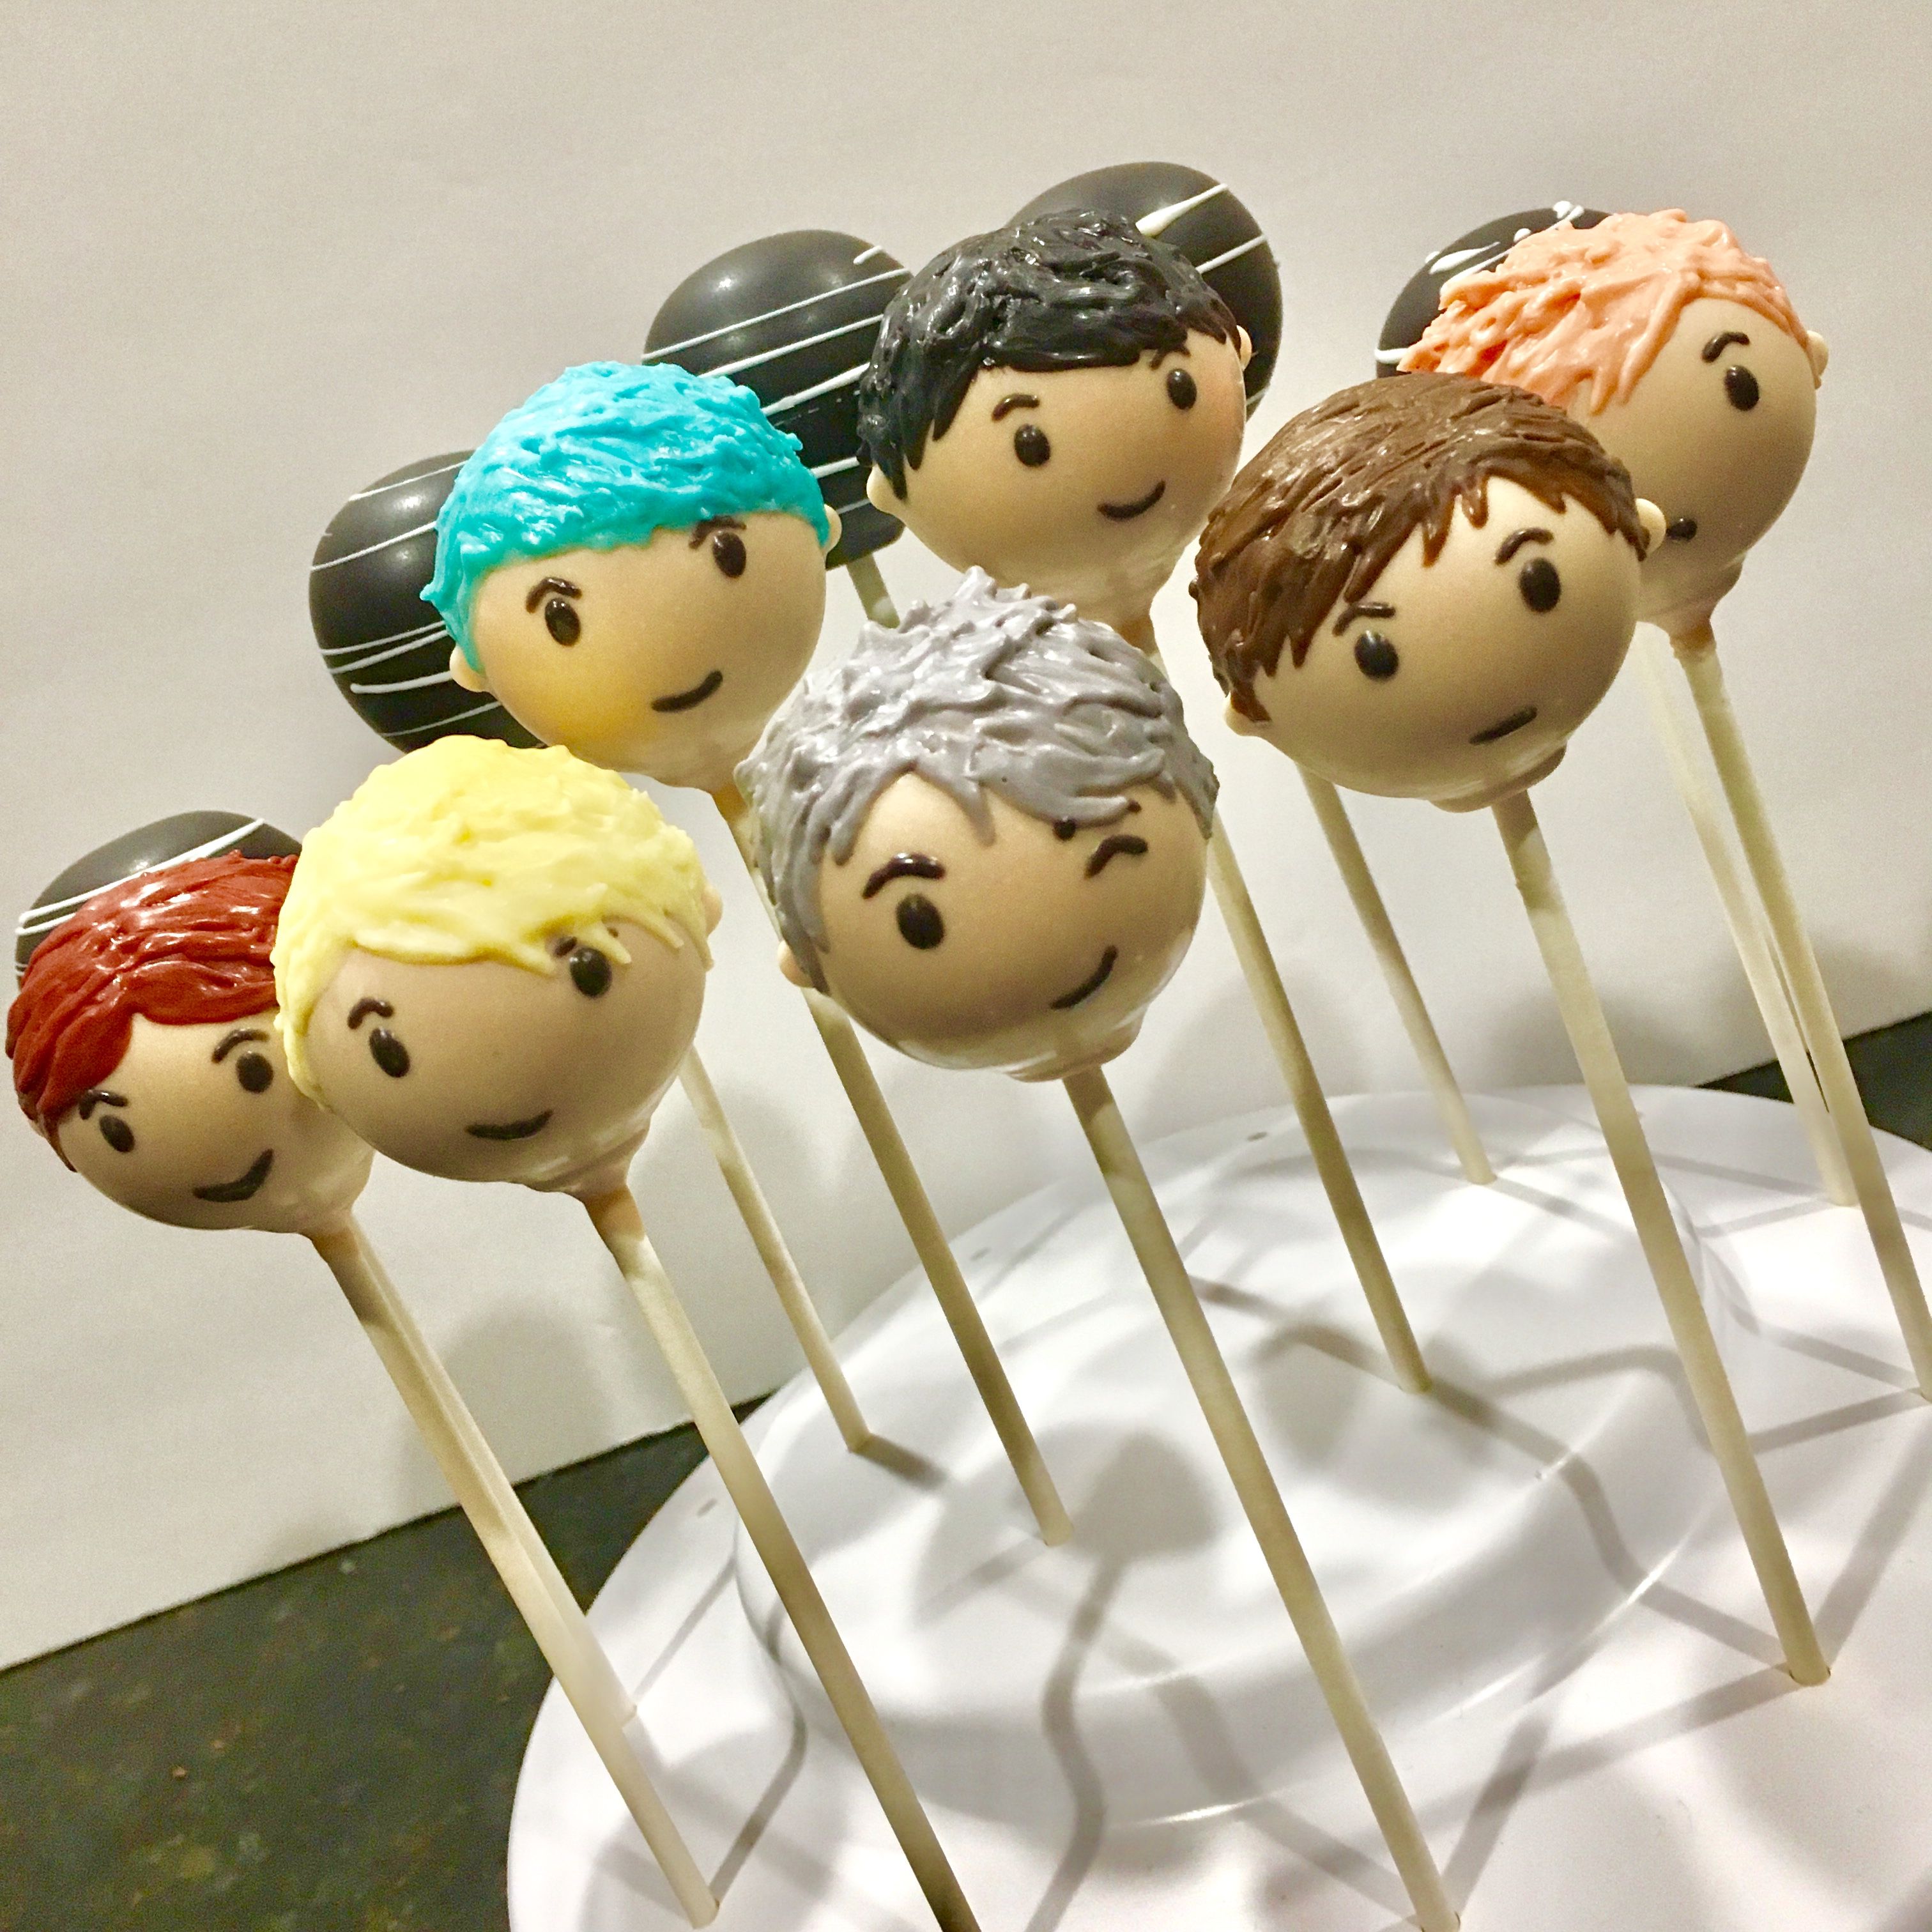 image of K-Pop themed cake pops with different icings as hair